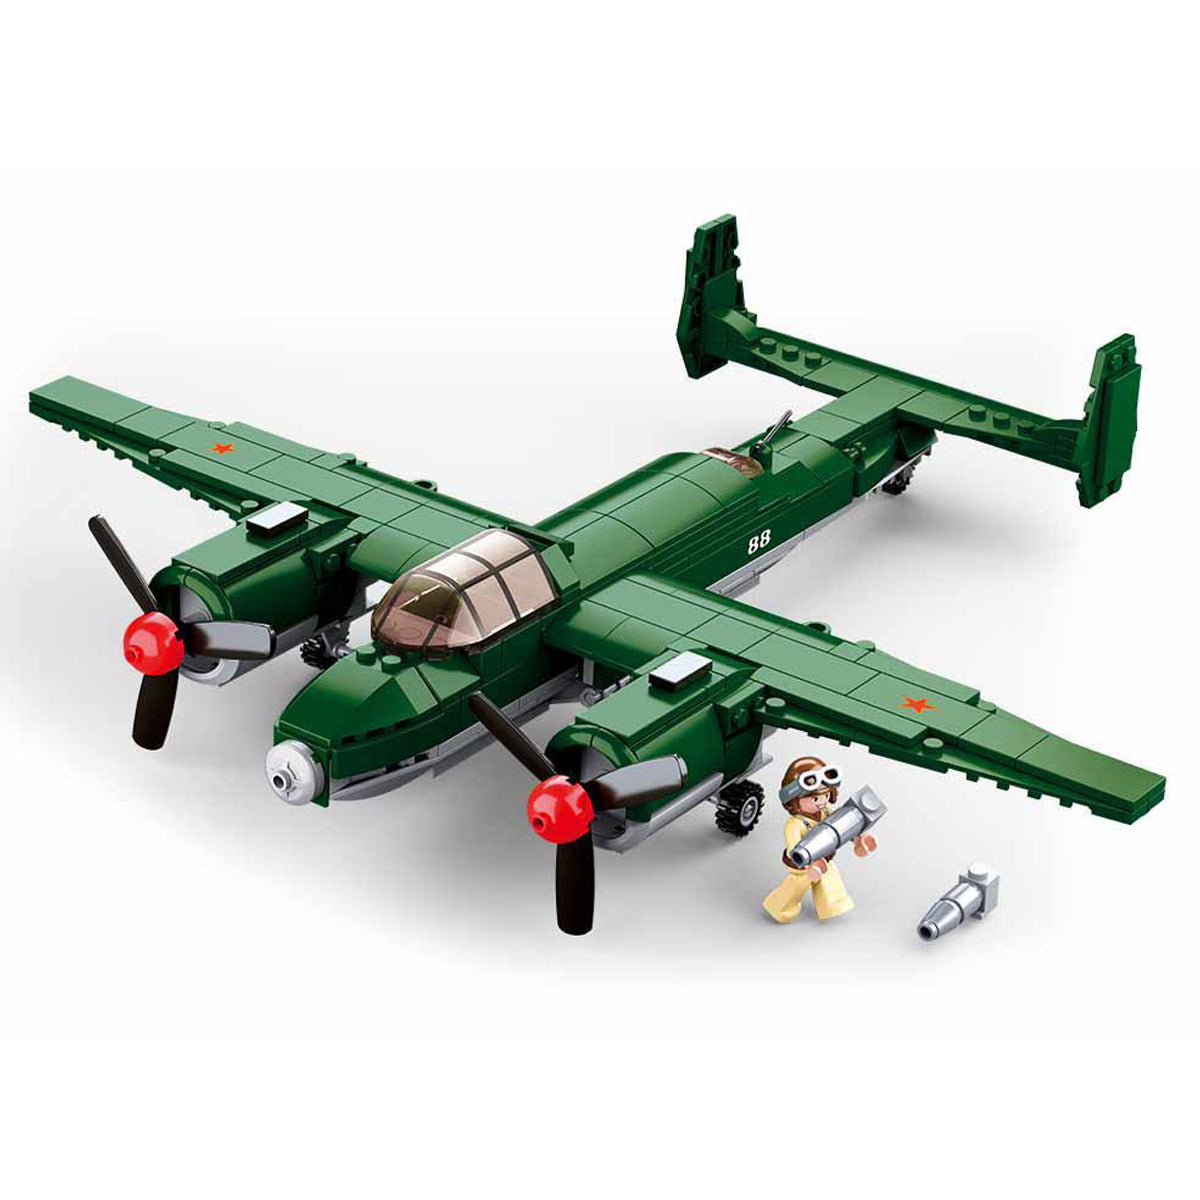 DAHONPA Military Series TU-2 Fighter Military Army Airplane Building Blocks Set with 311 Pieces